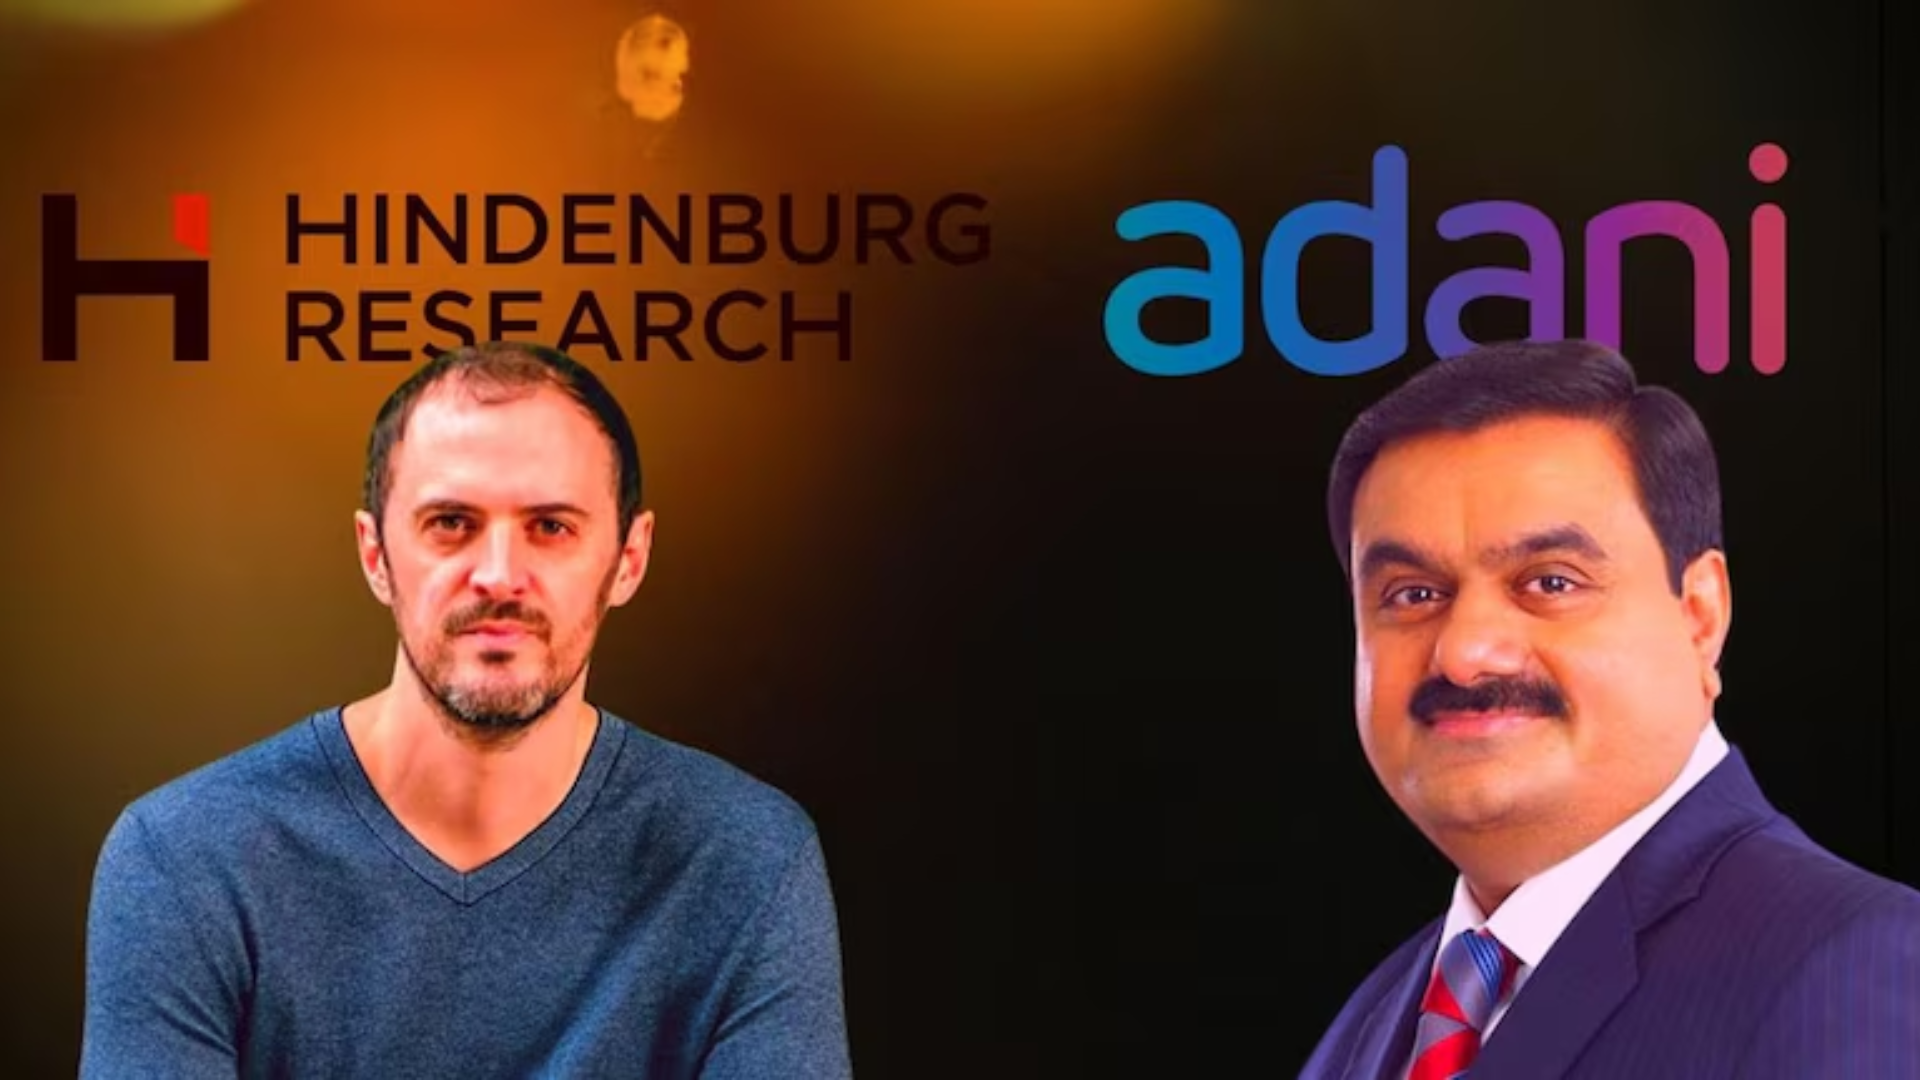 Hindenburg Reseach Receives 46-Page Show-Cause Notice From SEBI In Adani Case; Calls It “Attempt To Silence Those Who Expose Corruption”